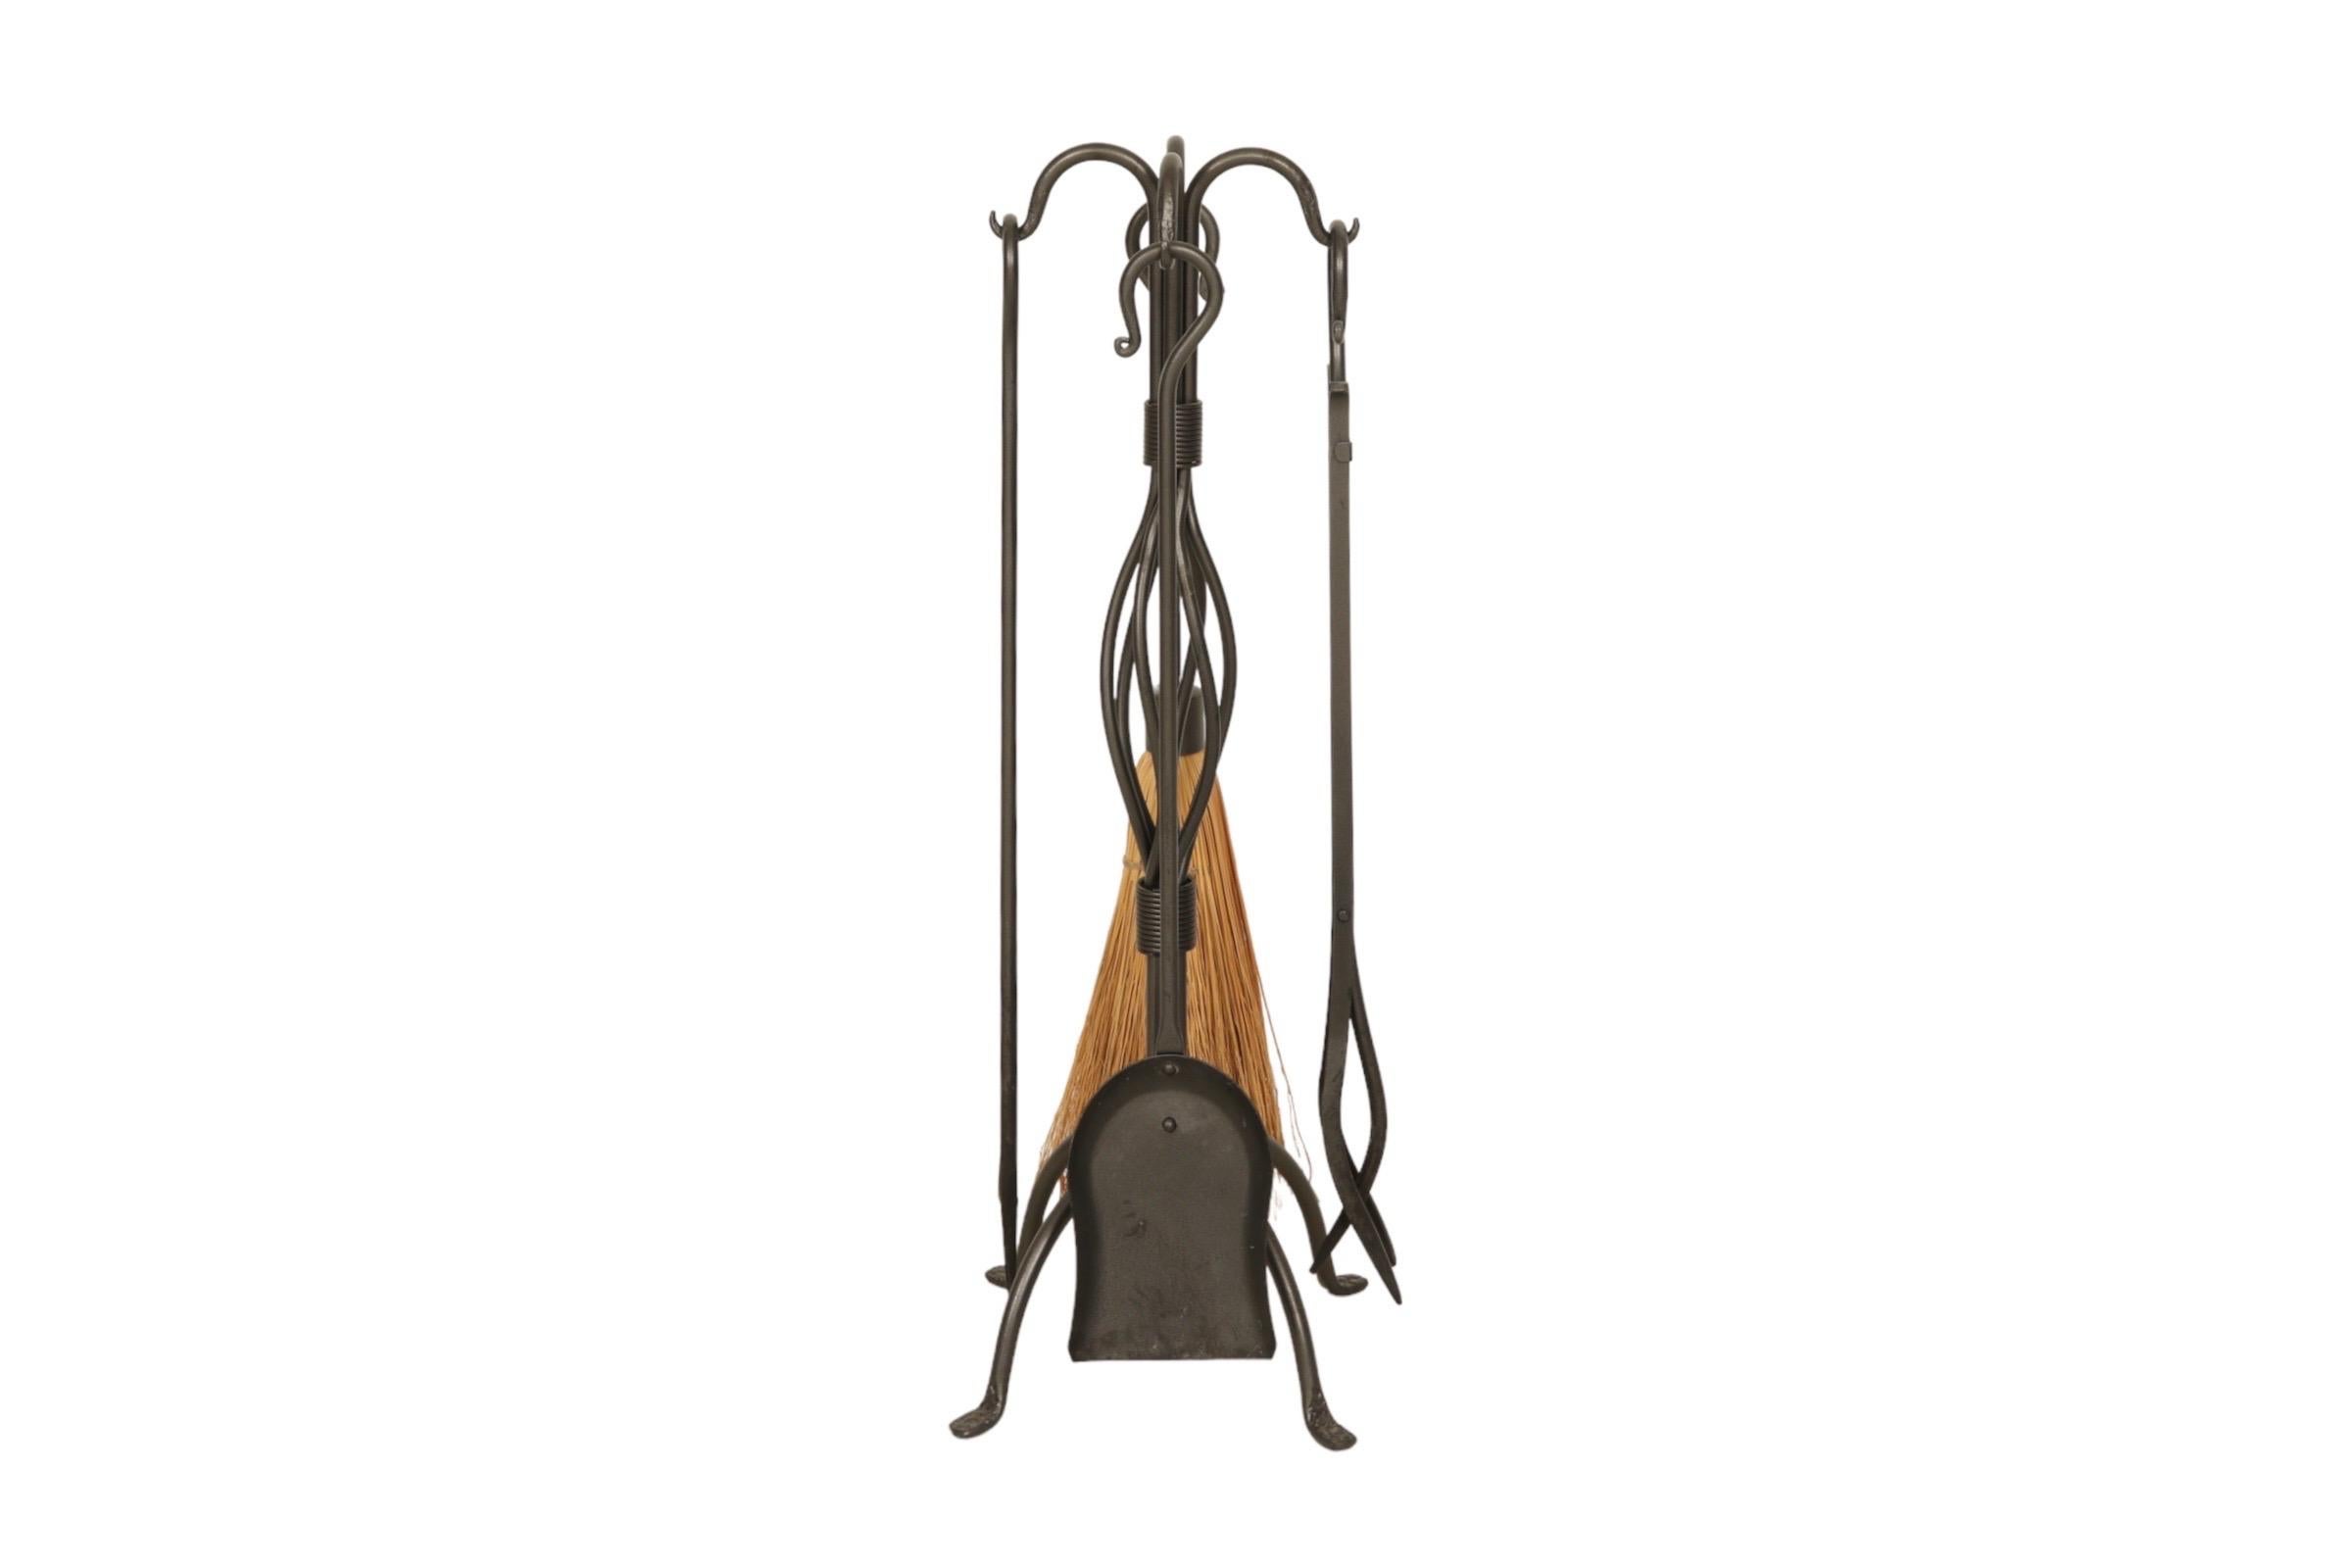 A set of black cast iron basket weave fireplace tools made by Pilgrim. An ash rake, poker, shovel and brush each have a curved hook handle. Tools hang from a cast iron yoke with an intertwined hand forged iron centerpiece supported on four arched